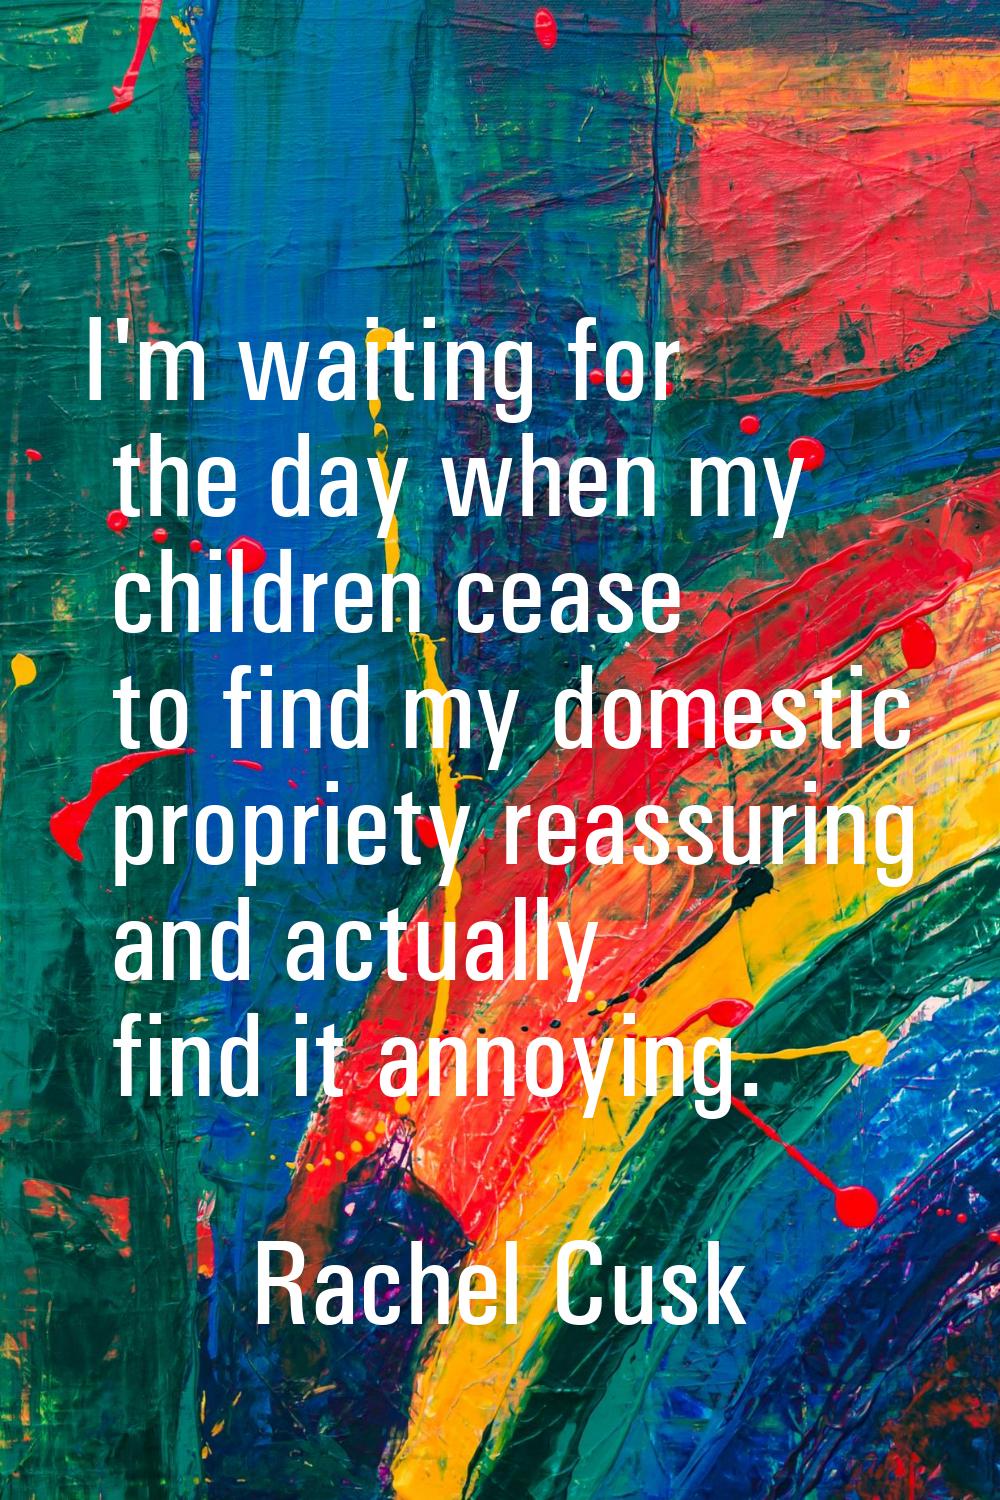 I'm waiting for the day when my children cease to find my domestic propriety reassuring and actuall